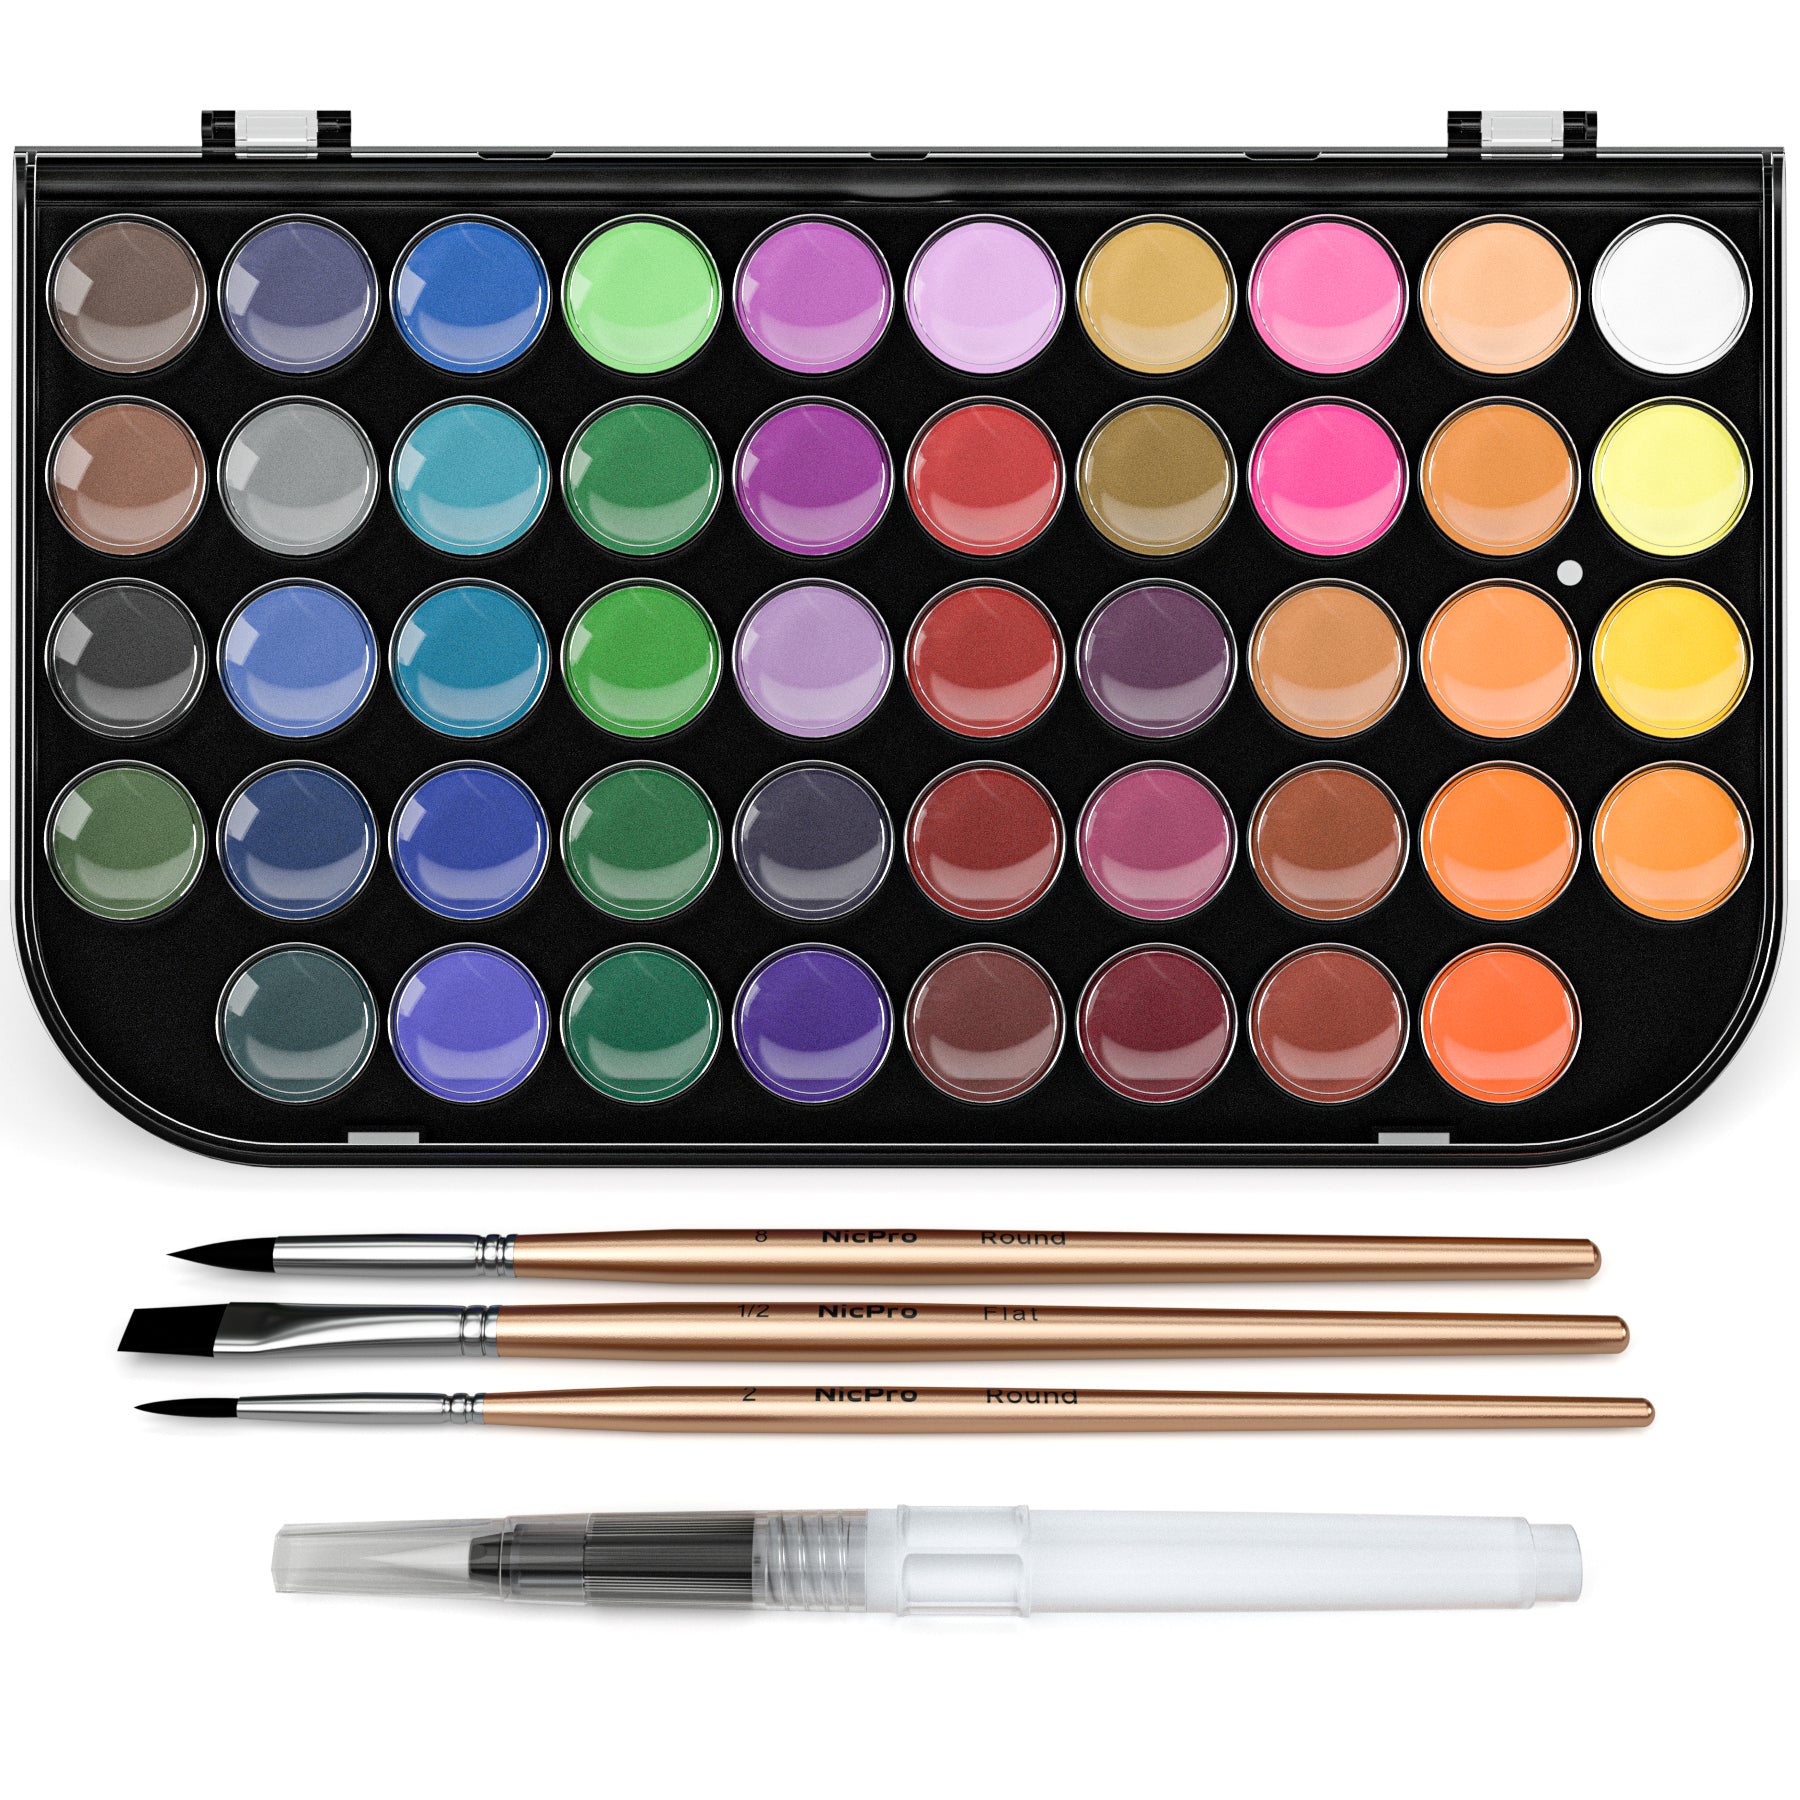 Premium Artist Paint Brush Set of 16 - Includes Palette Knife, Sponge & Organizing Case - Painting Brushes for Kids, Adults or Professionals - Perfect